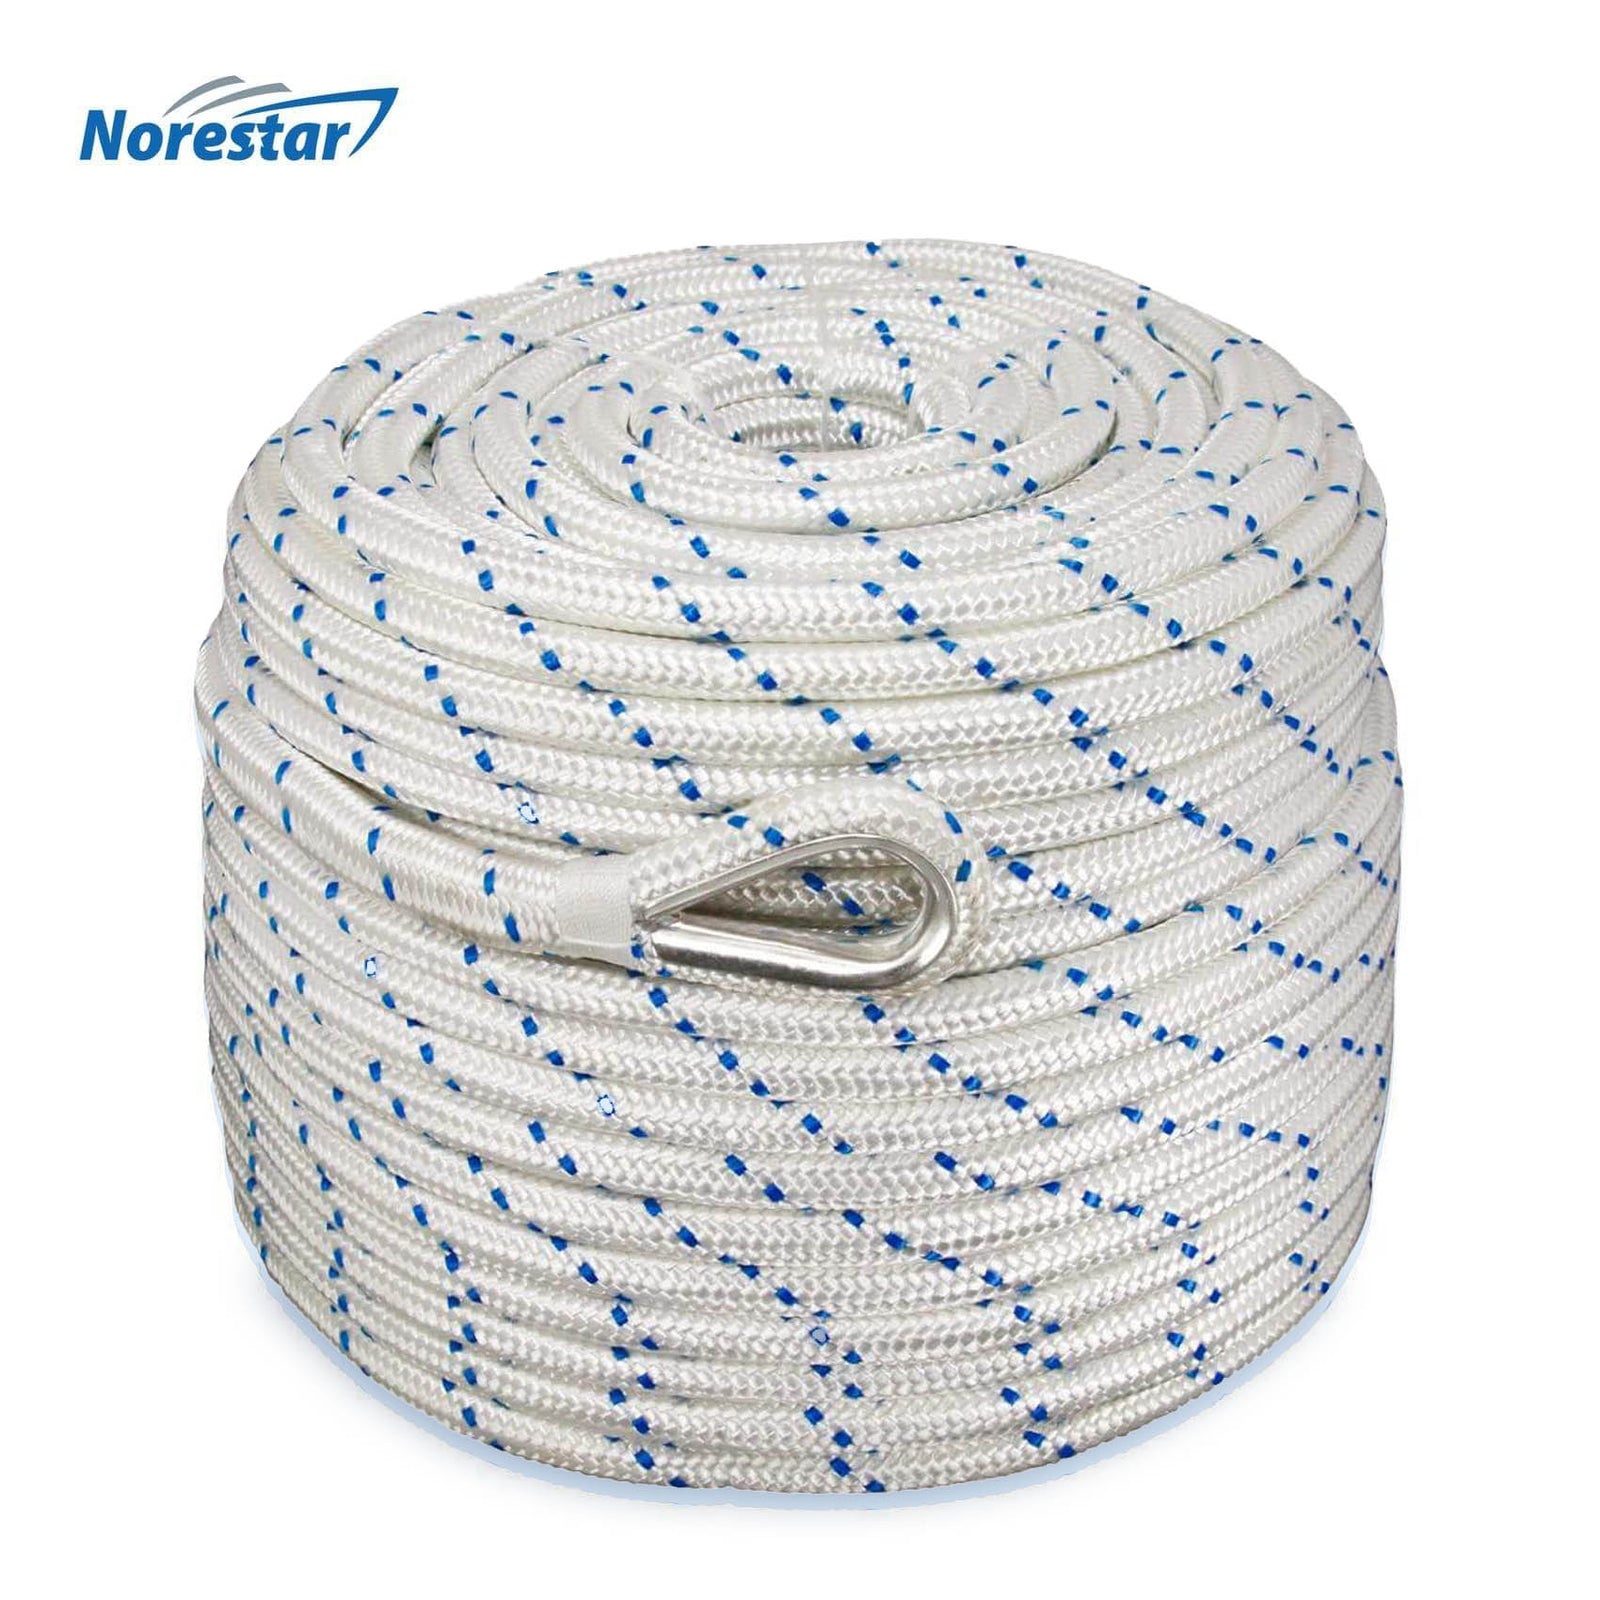 Norestar Double-Braided Nylon Anchor Rope with Stainless Steel